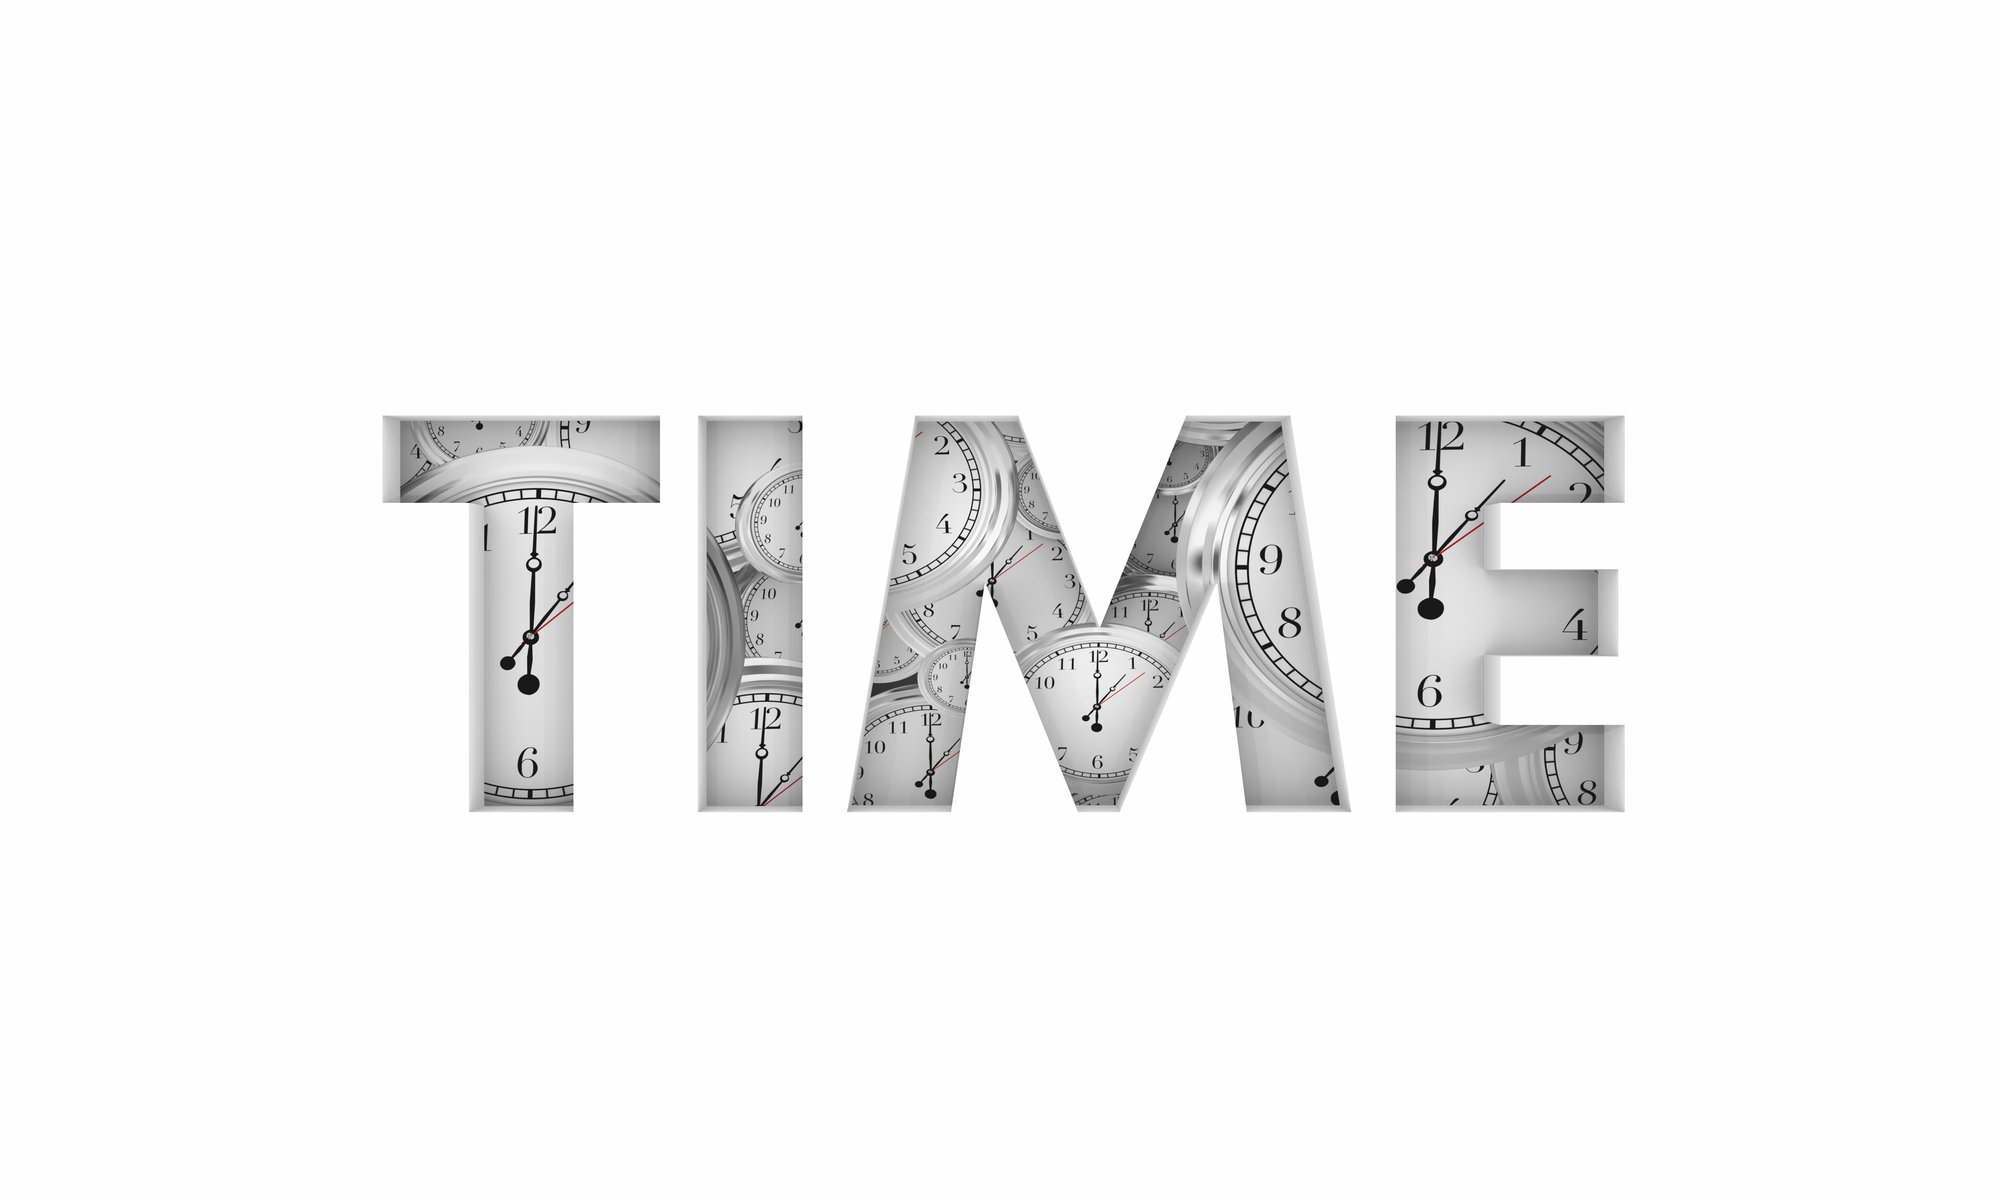 Selection of Best Open Source Time Tracking Software